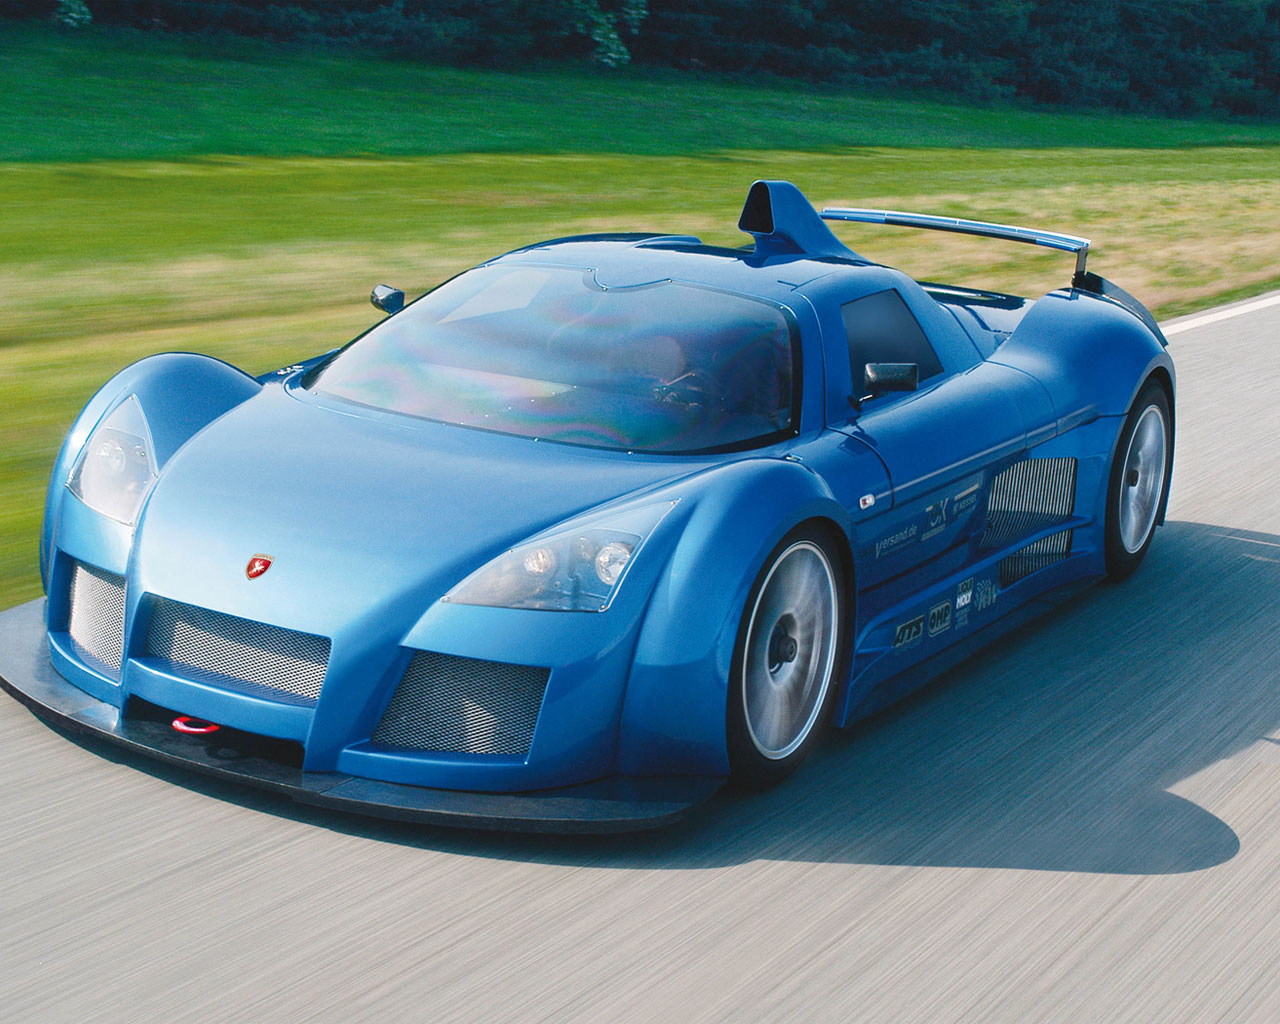 Amazing Gumpert Pictures & Backgrounds